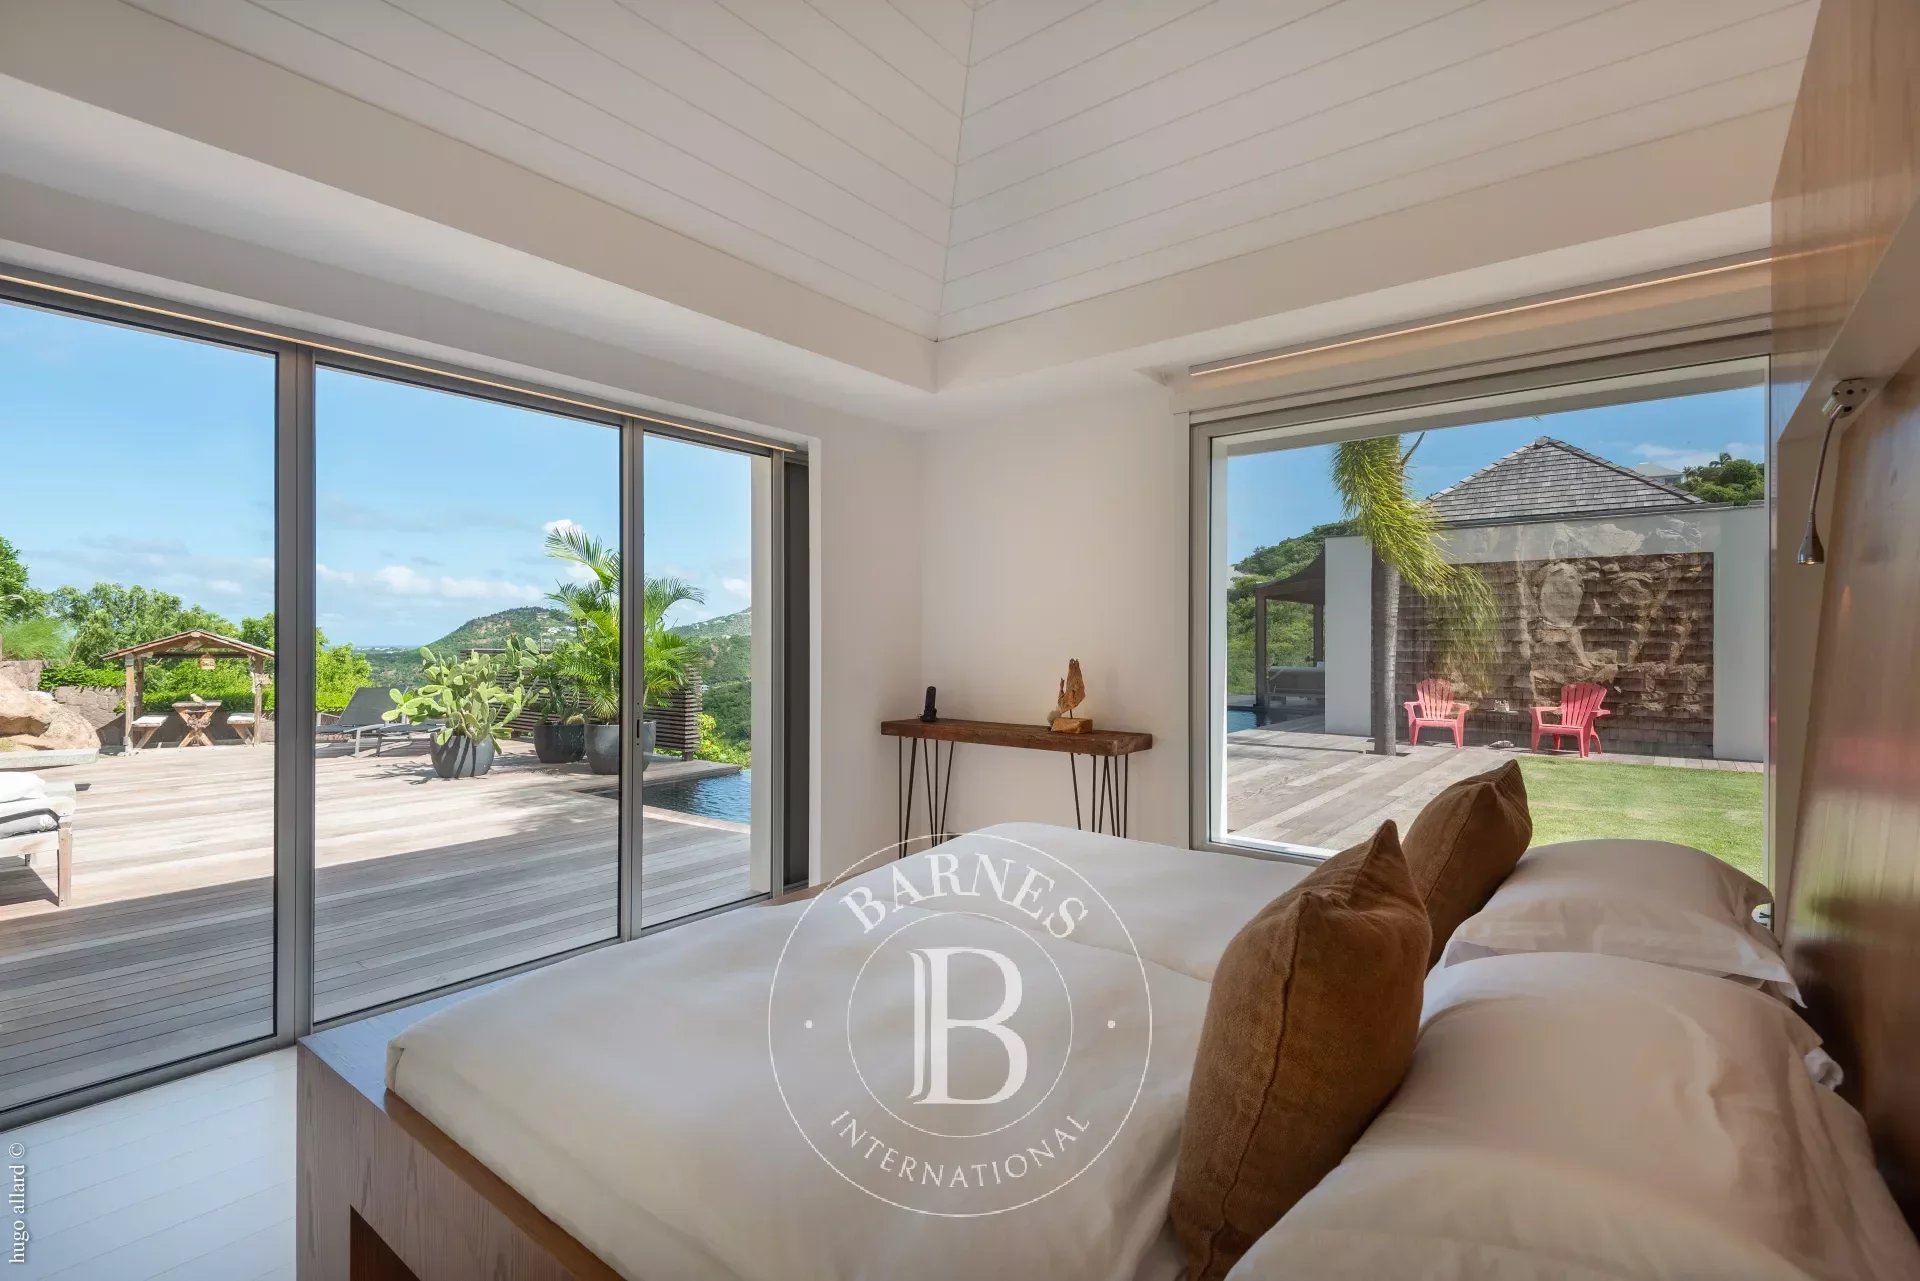 5 -Bedroom Villa in St.Barths - picture 7 title=